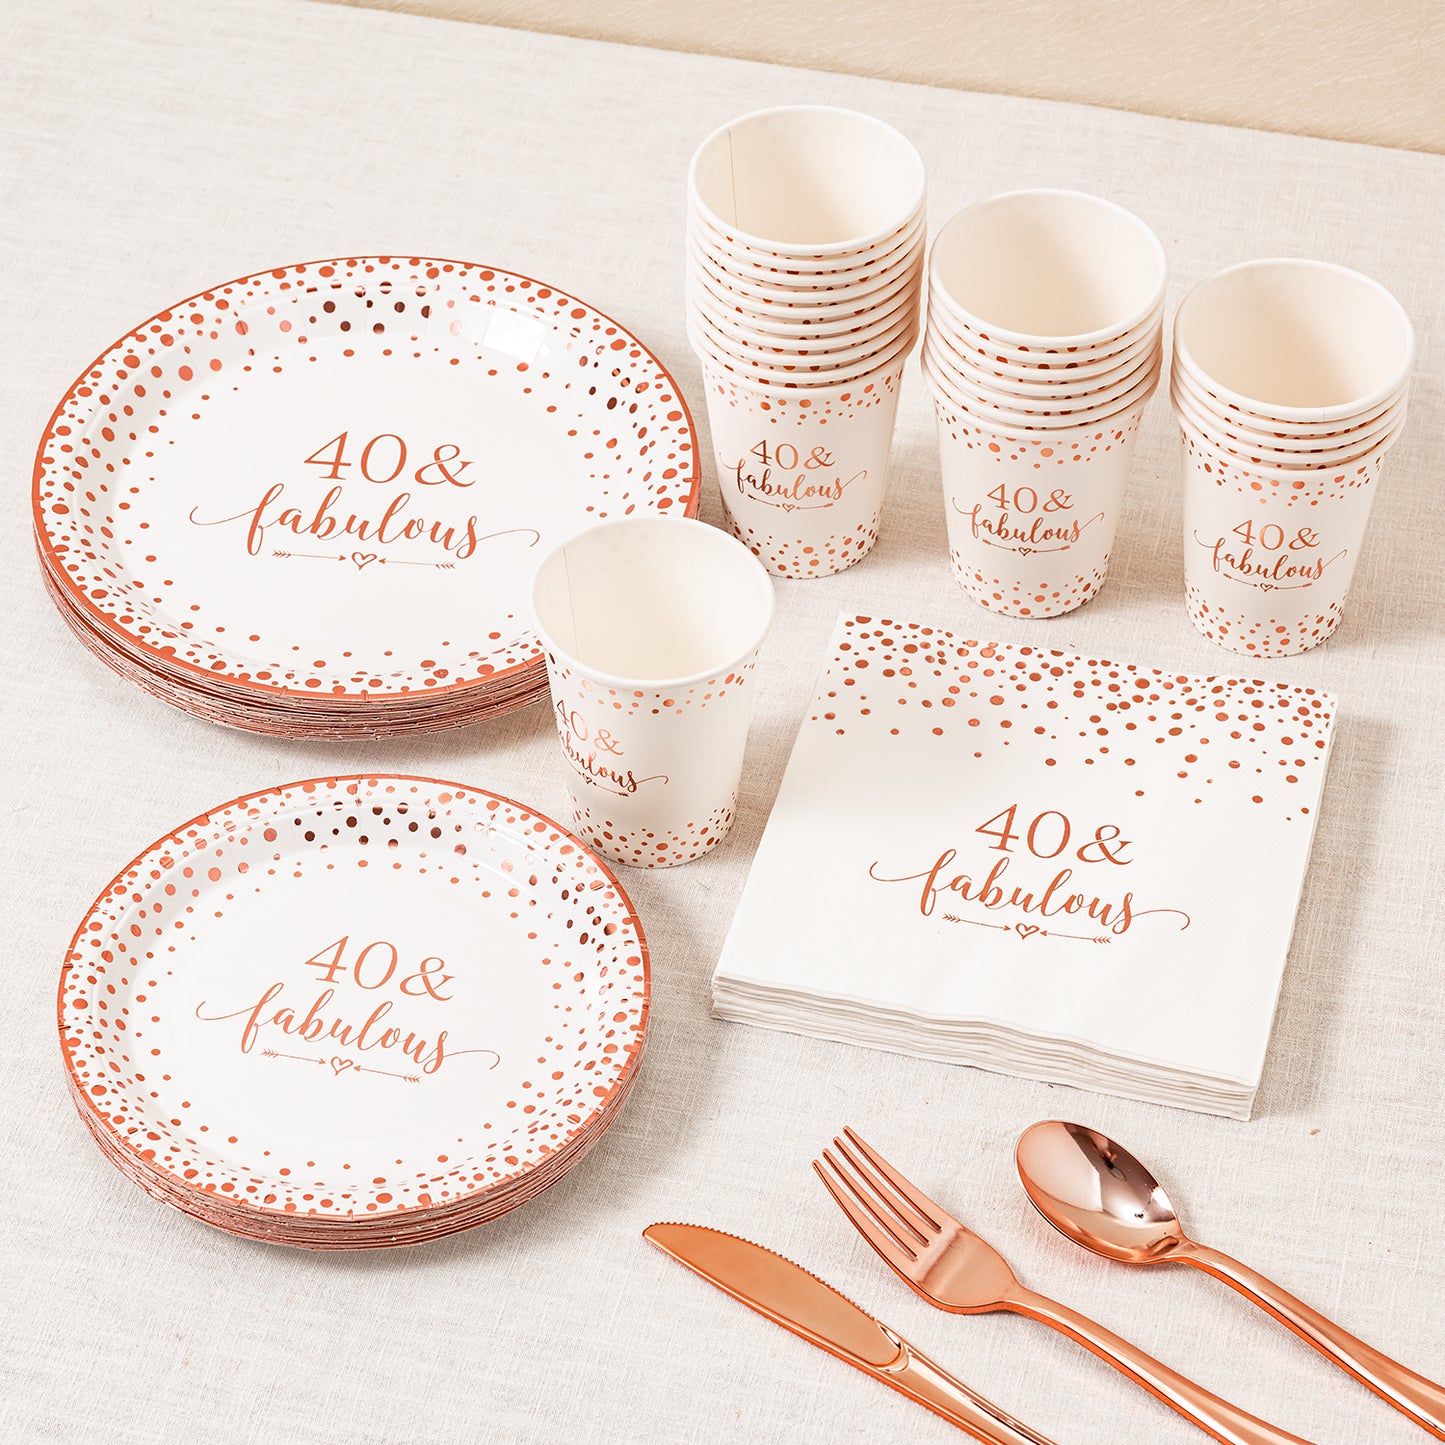 Crisky Rose Gold 40 Fabulous Napkins Plates Cups Set for Women 40th Birthday Party Decorations Supplies, Disposable Tableware Set of 24 (9" Plates, 7" Plates, Luncheon Napkins, 9oz Cups)